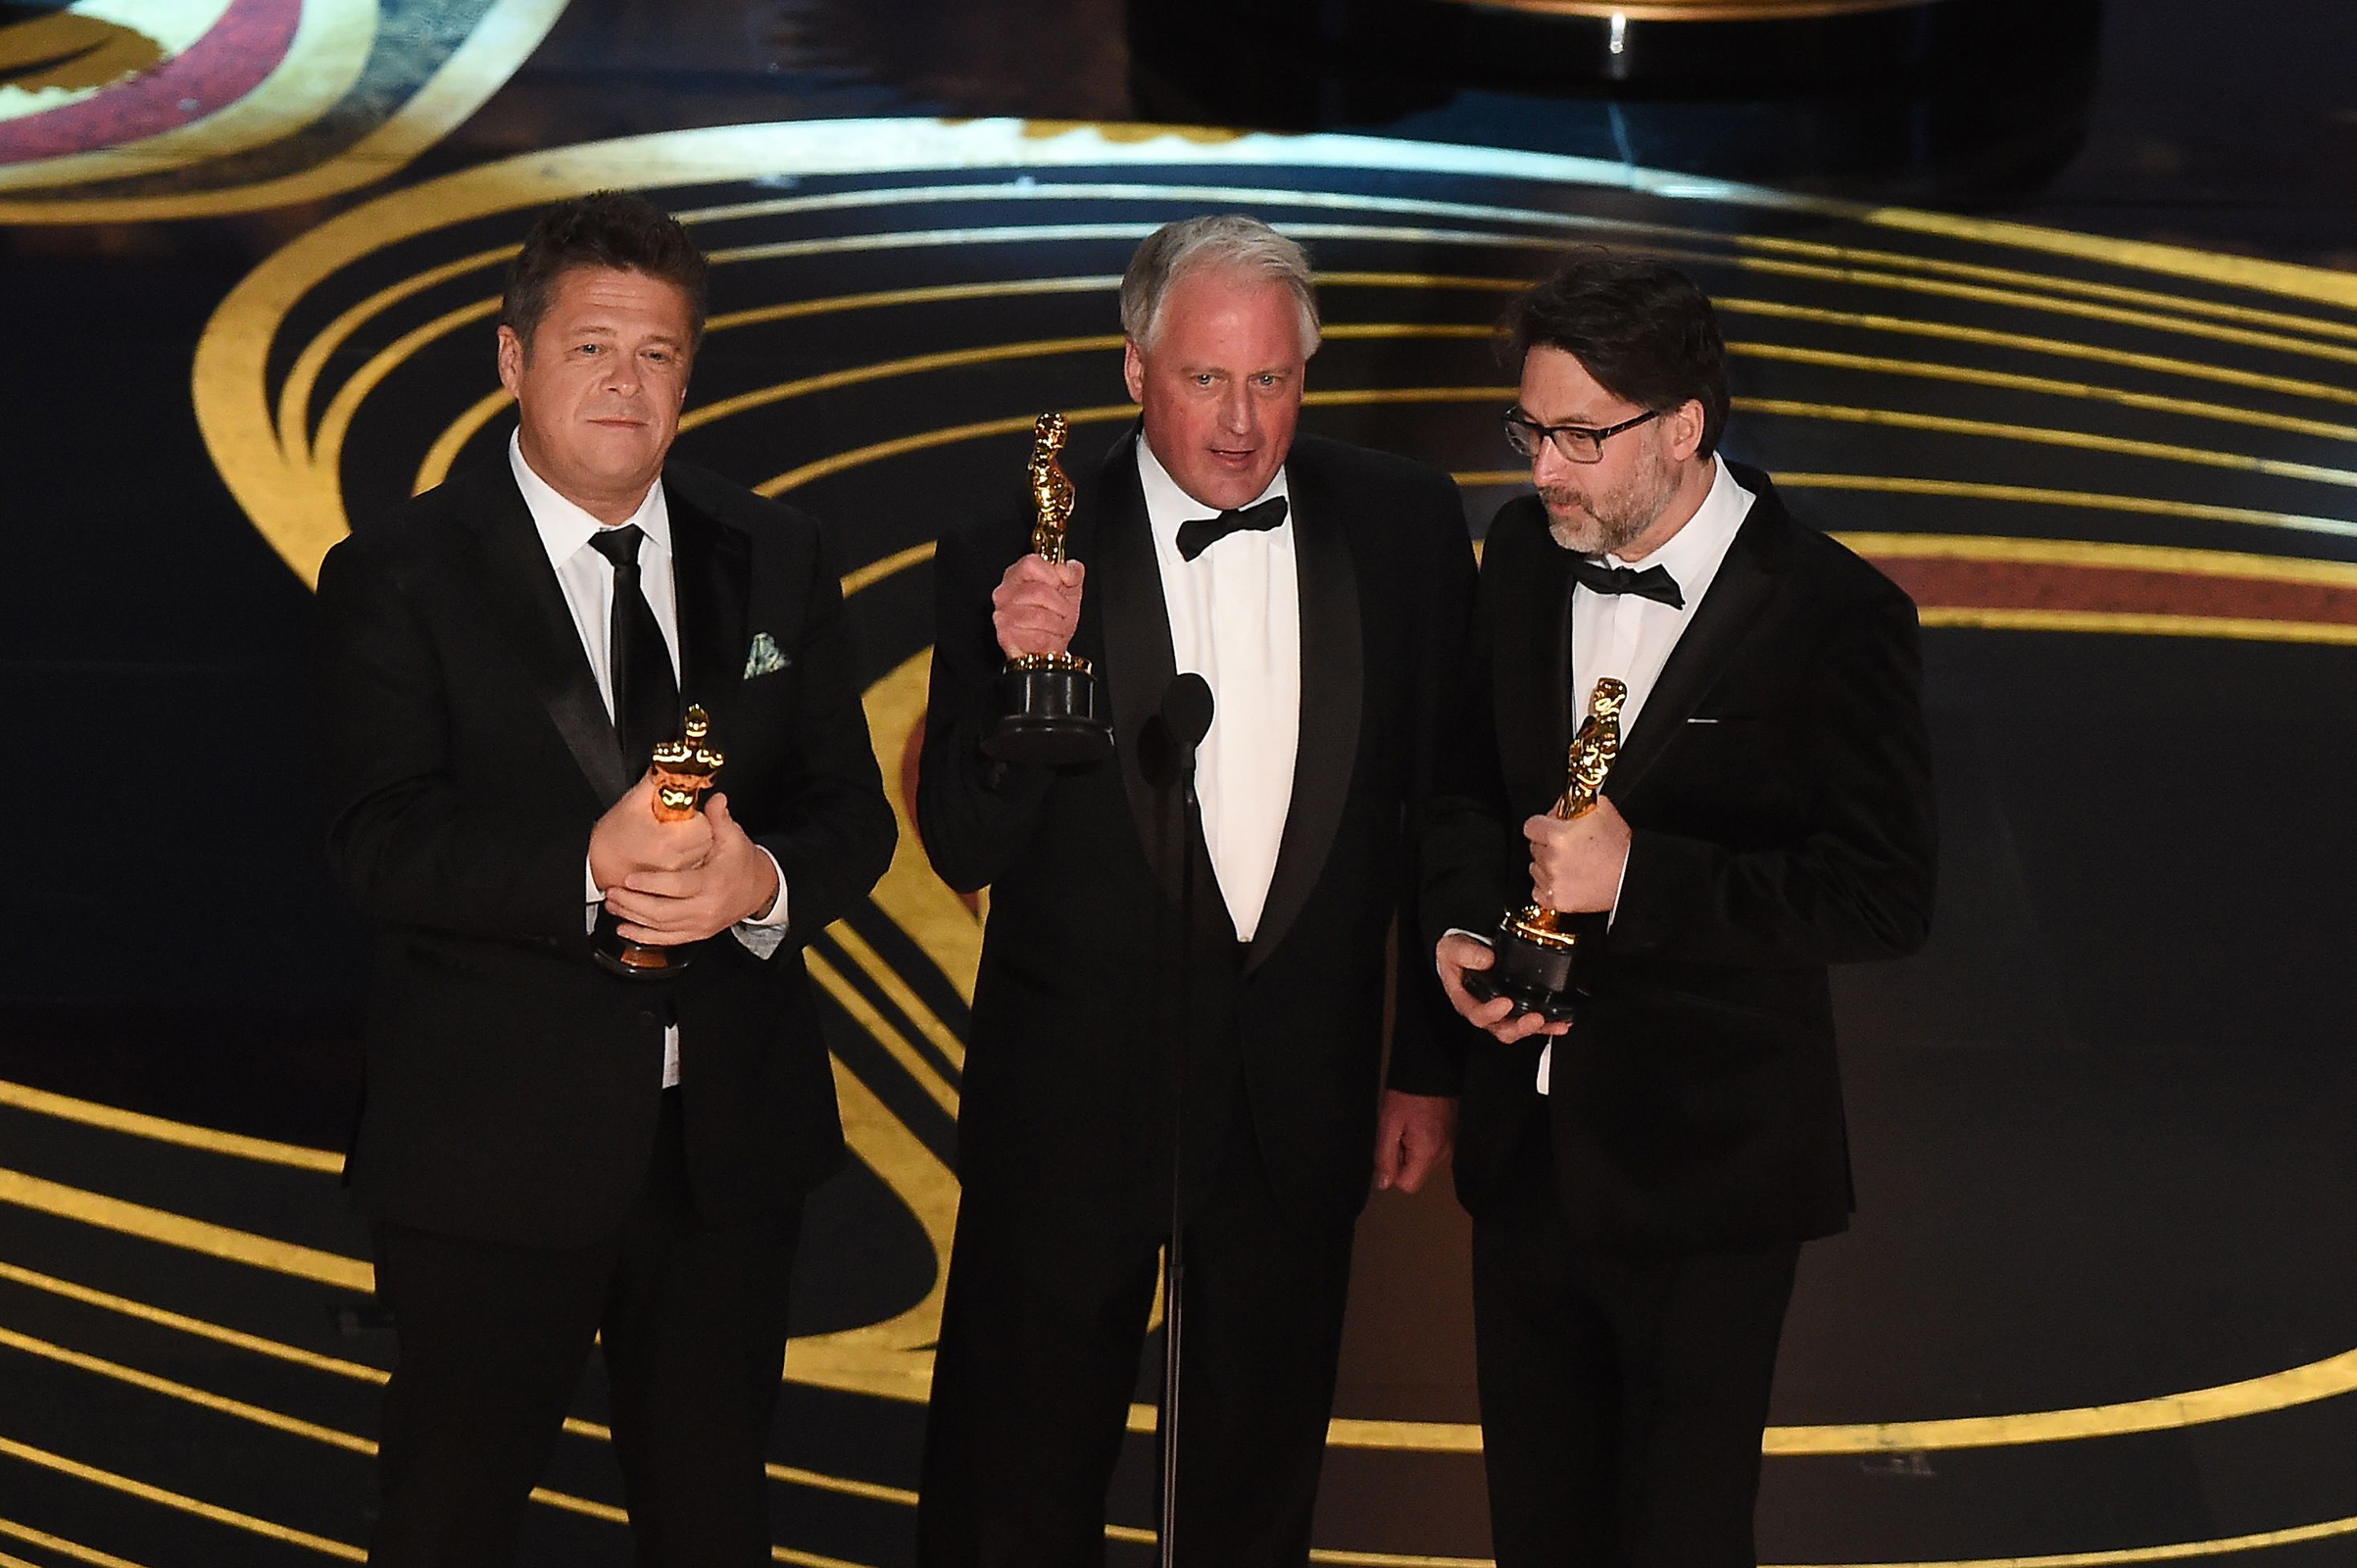 Best Sound Mixing nominees for "Bohemian Rhapsody" Paul Massey, Tim Cavagin and John Casali accepts the award for Best Sound Mixing during the 91st Annual Academy Awards at the Dolby Theatre in Hollywood on Feb. 24, 2019. (Valerie Macon—AFP/Getty Images)